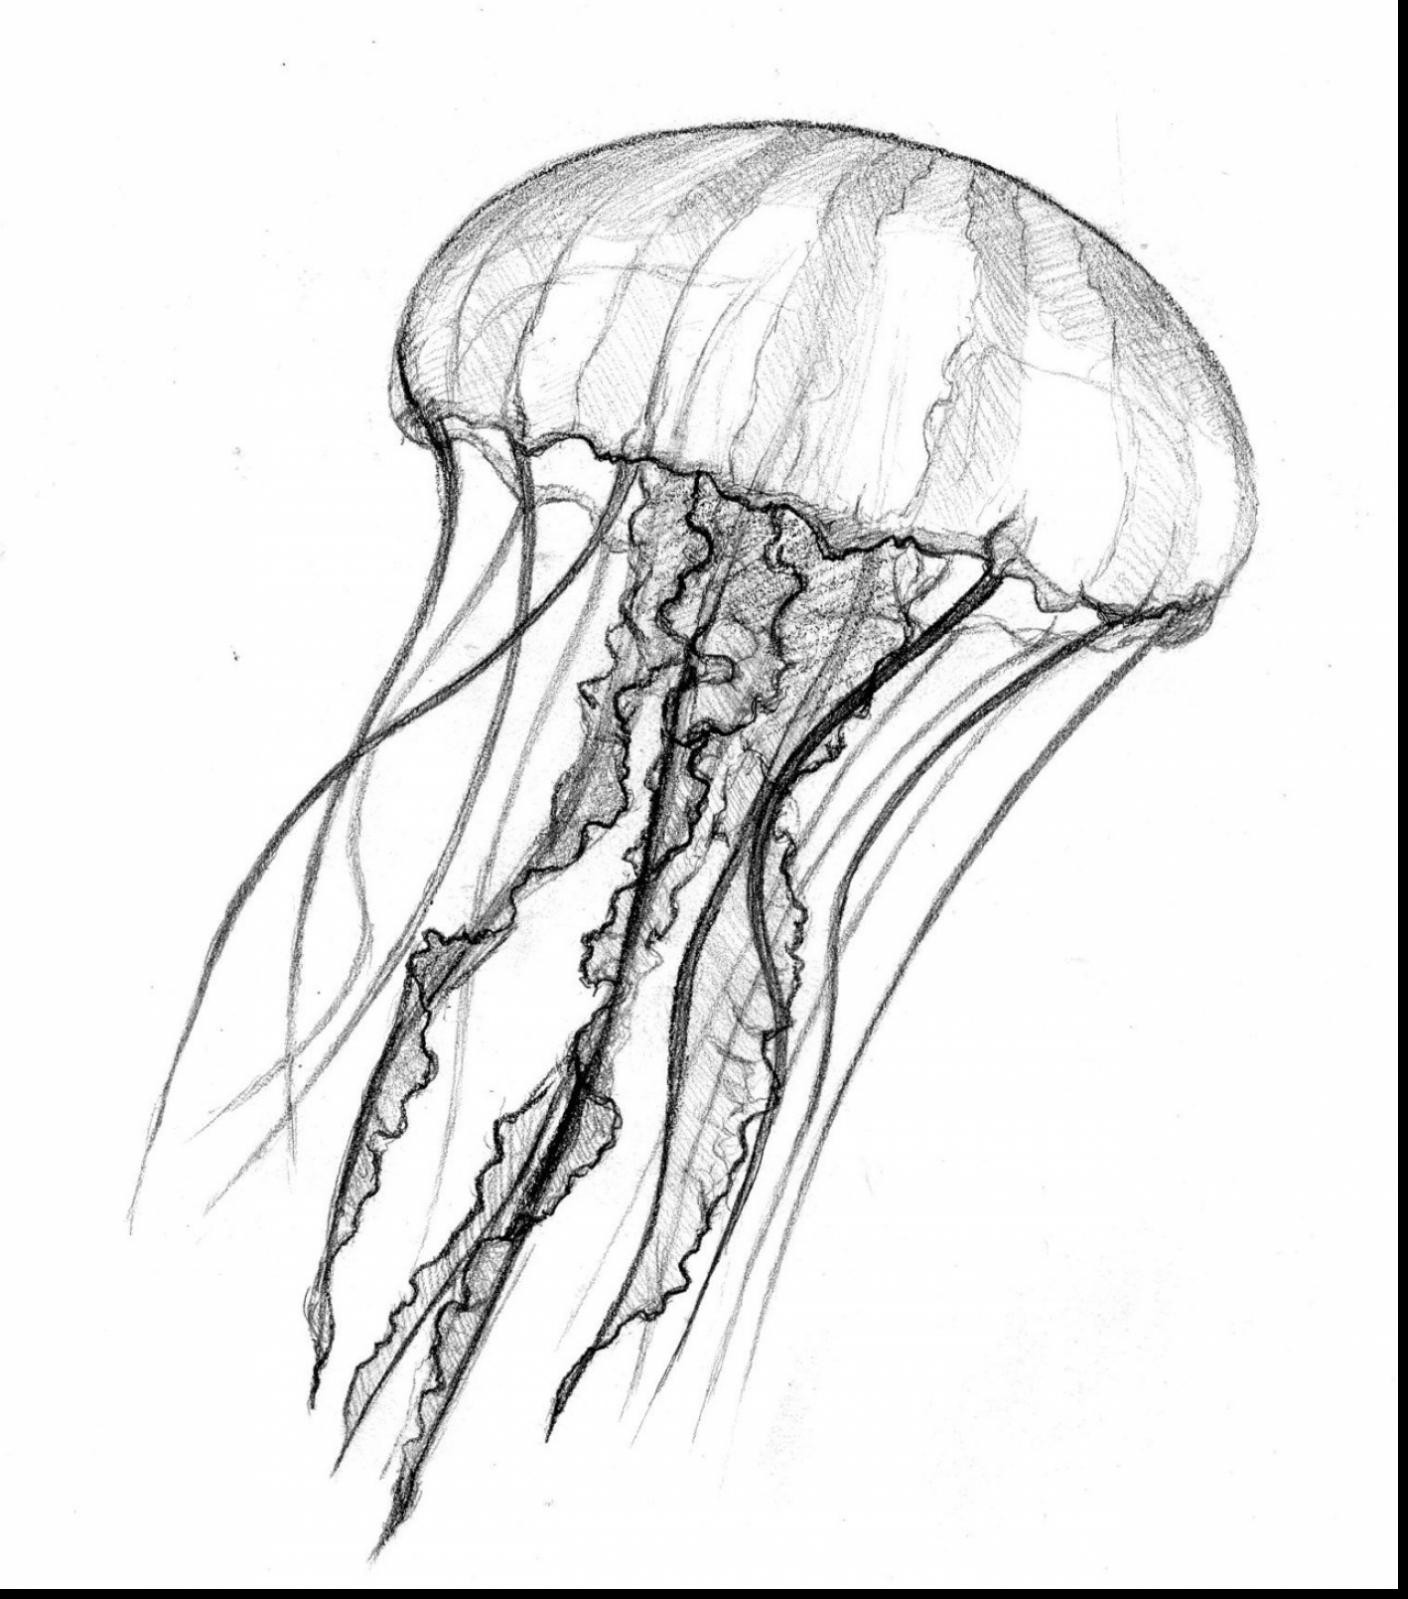 Creative Jellyfish Sketch Drawing with Realistic